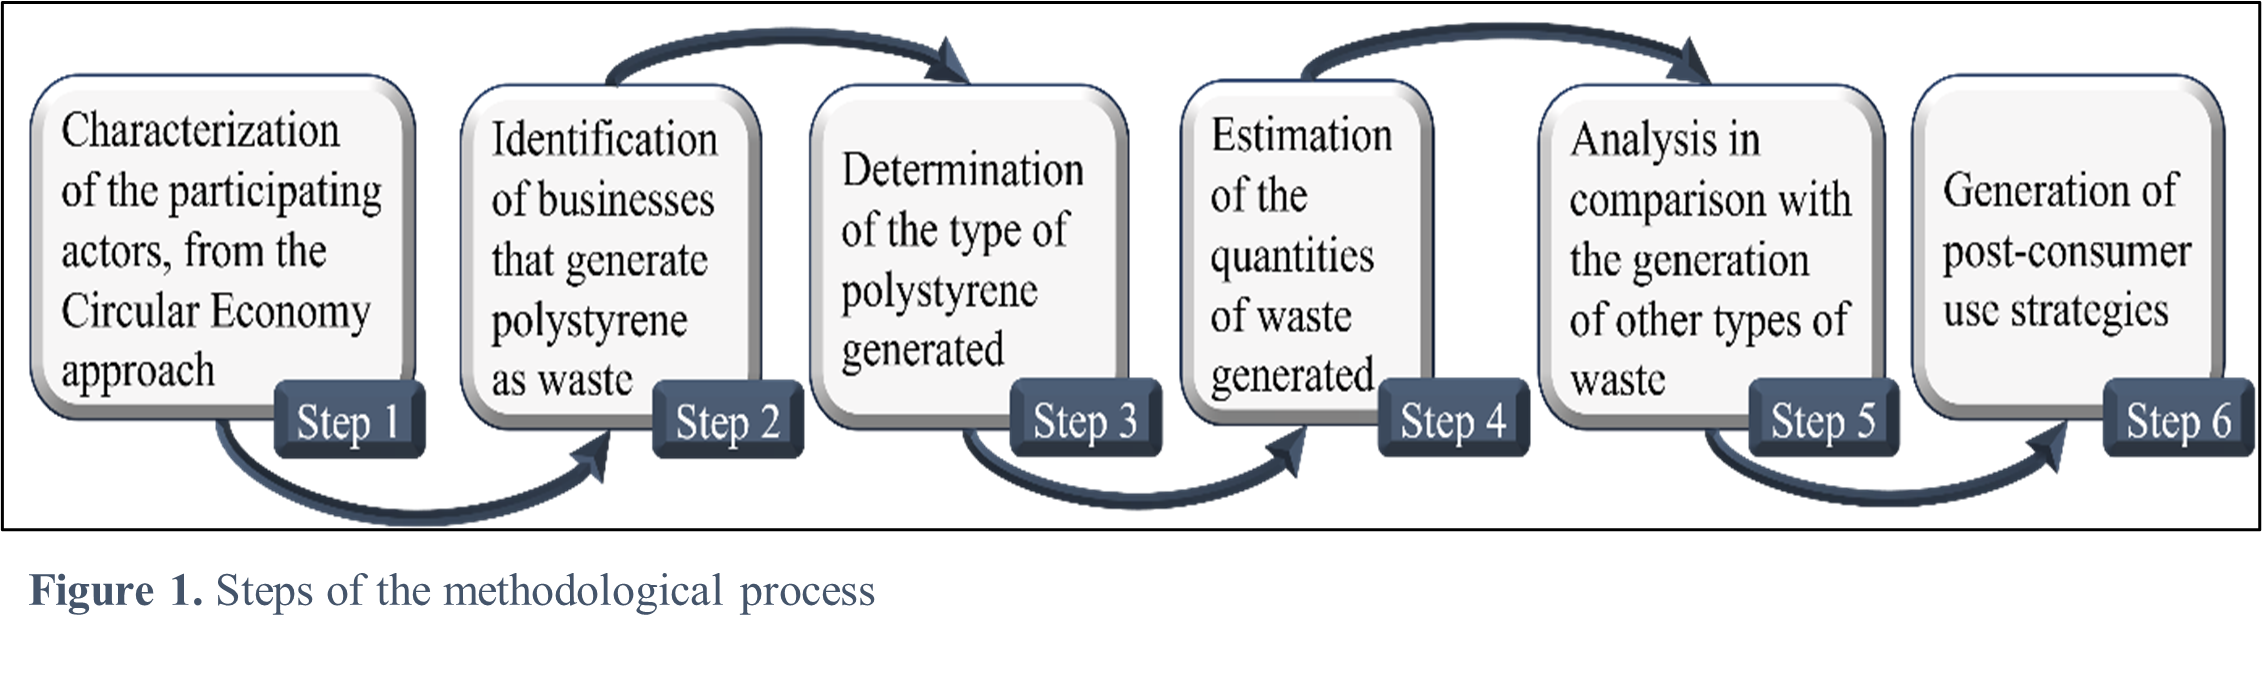 Steps of the methodological process